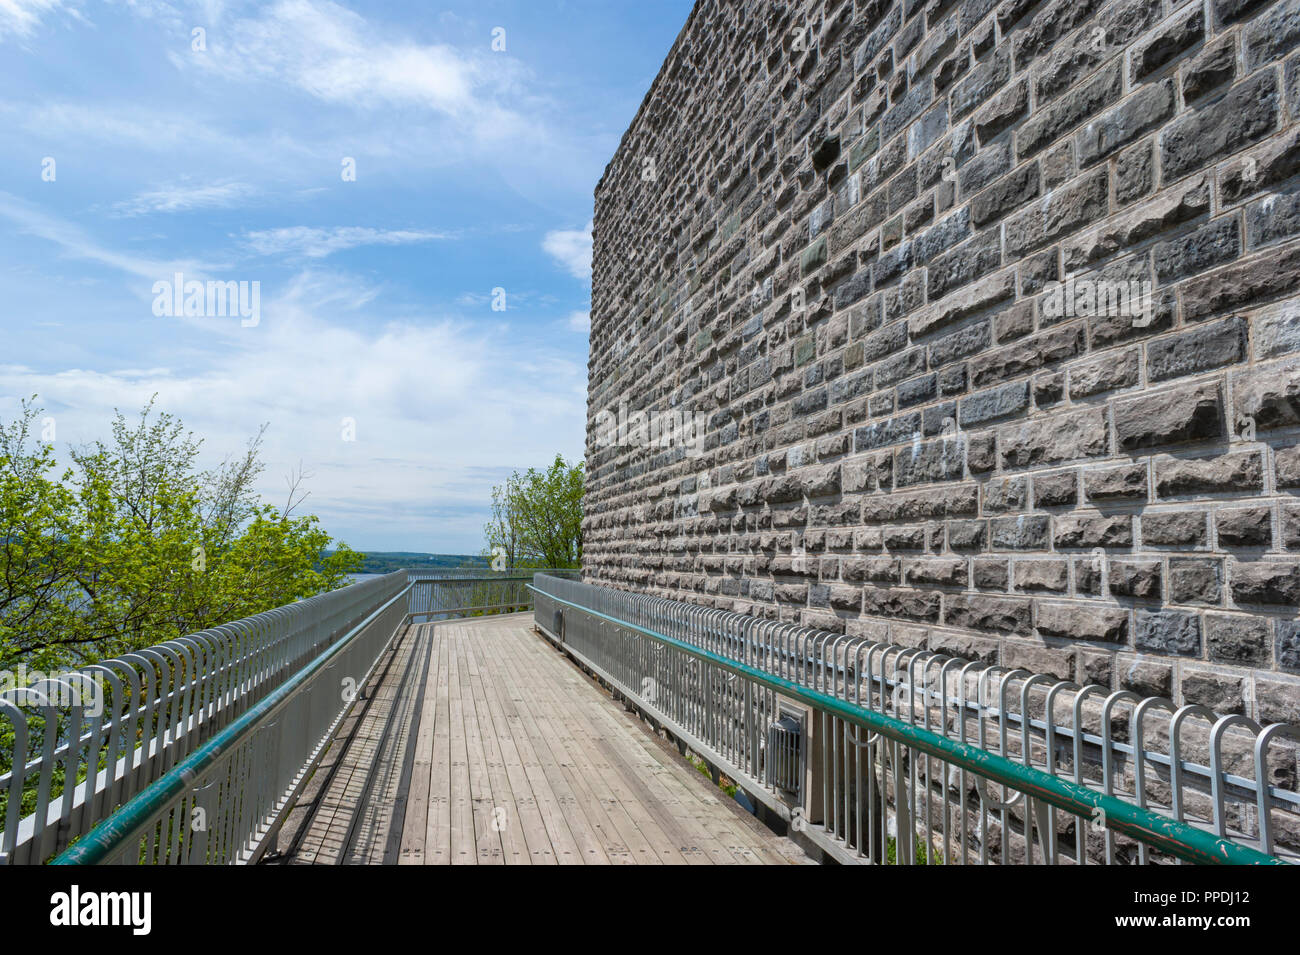 Boardwalk on the Promenade des Gouverneurs, along the fortified walls of the Citadelle of Quebec, overlooking the Saint Lawrence River. Quebec City Stock Photo